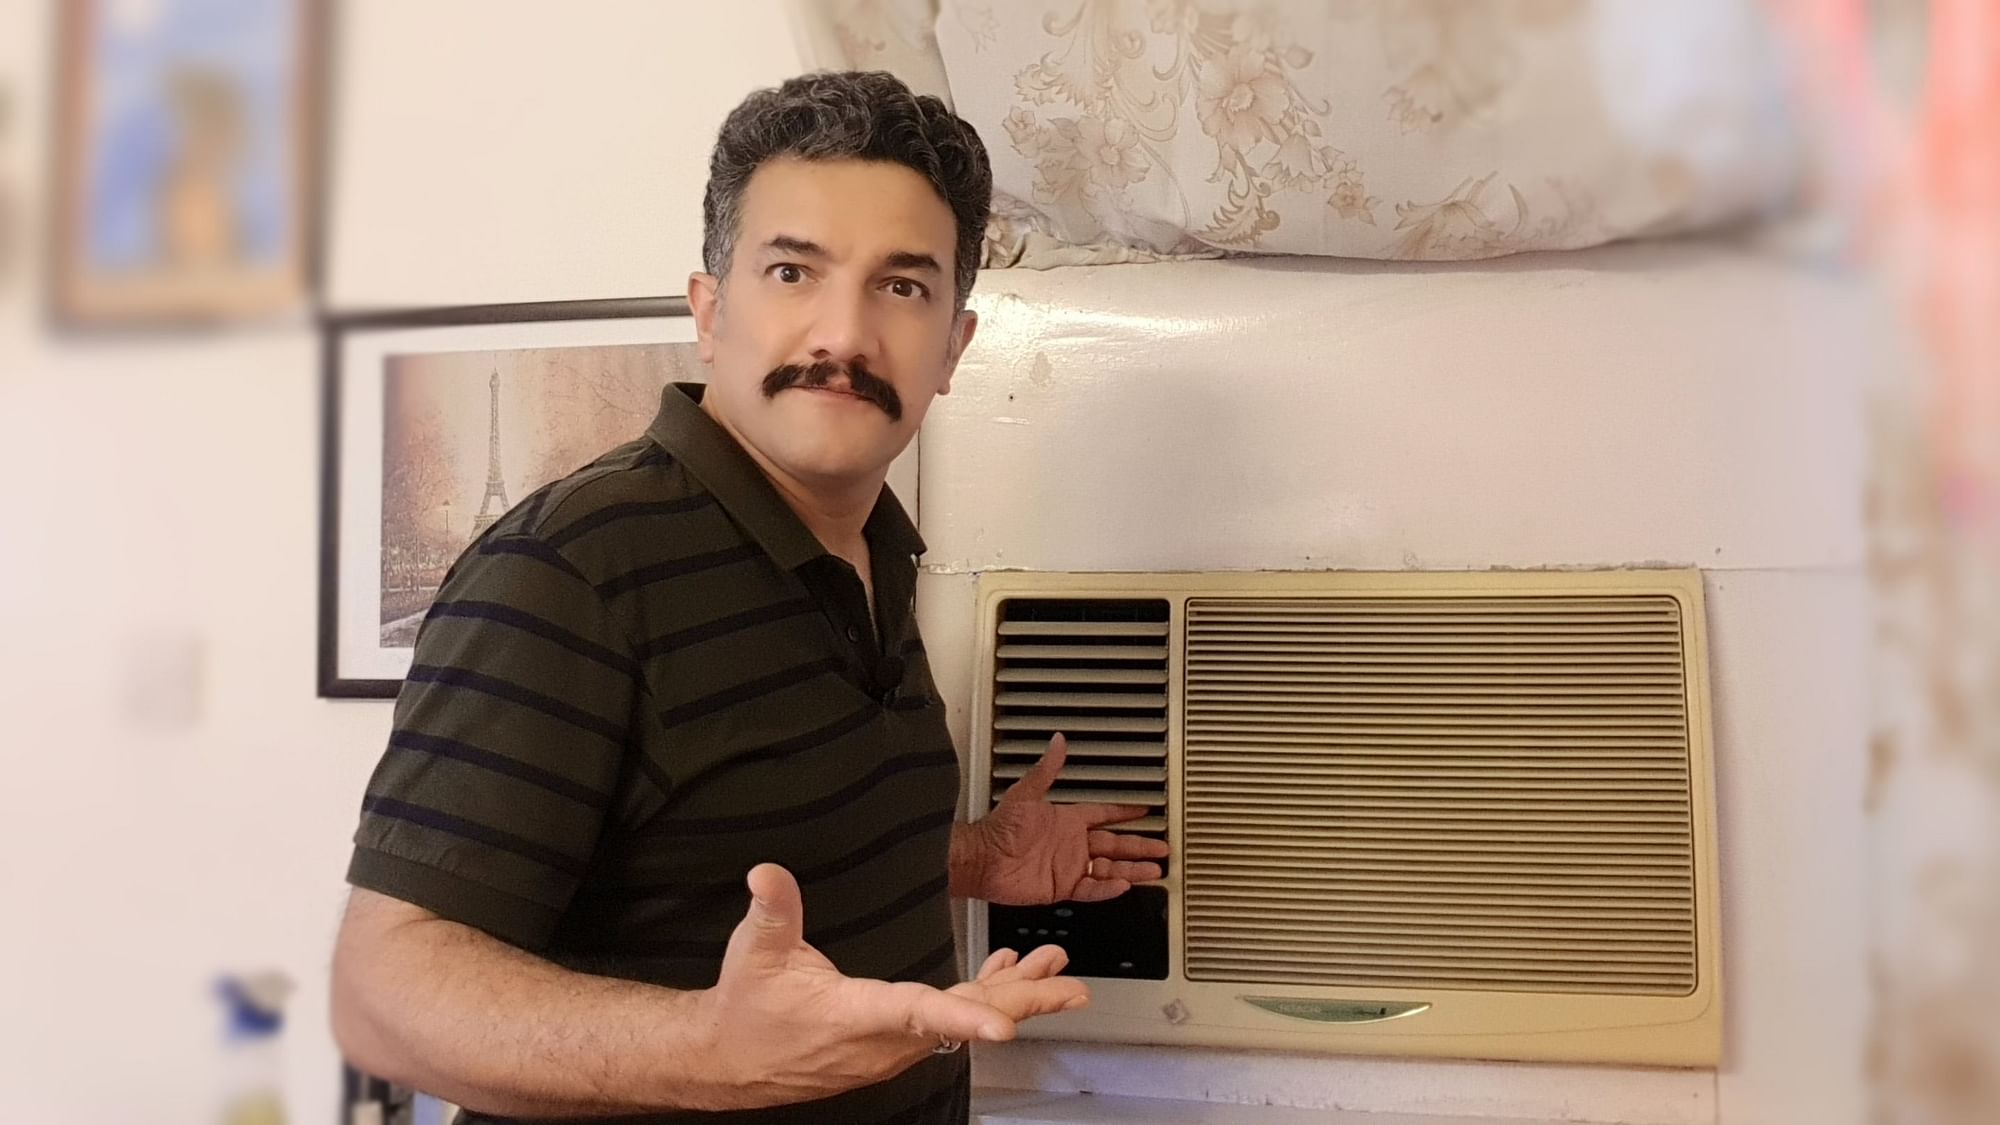 A do-it-yourself video on how to service your AC.